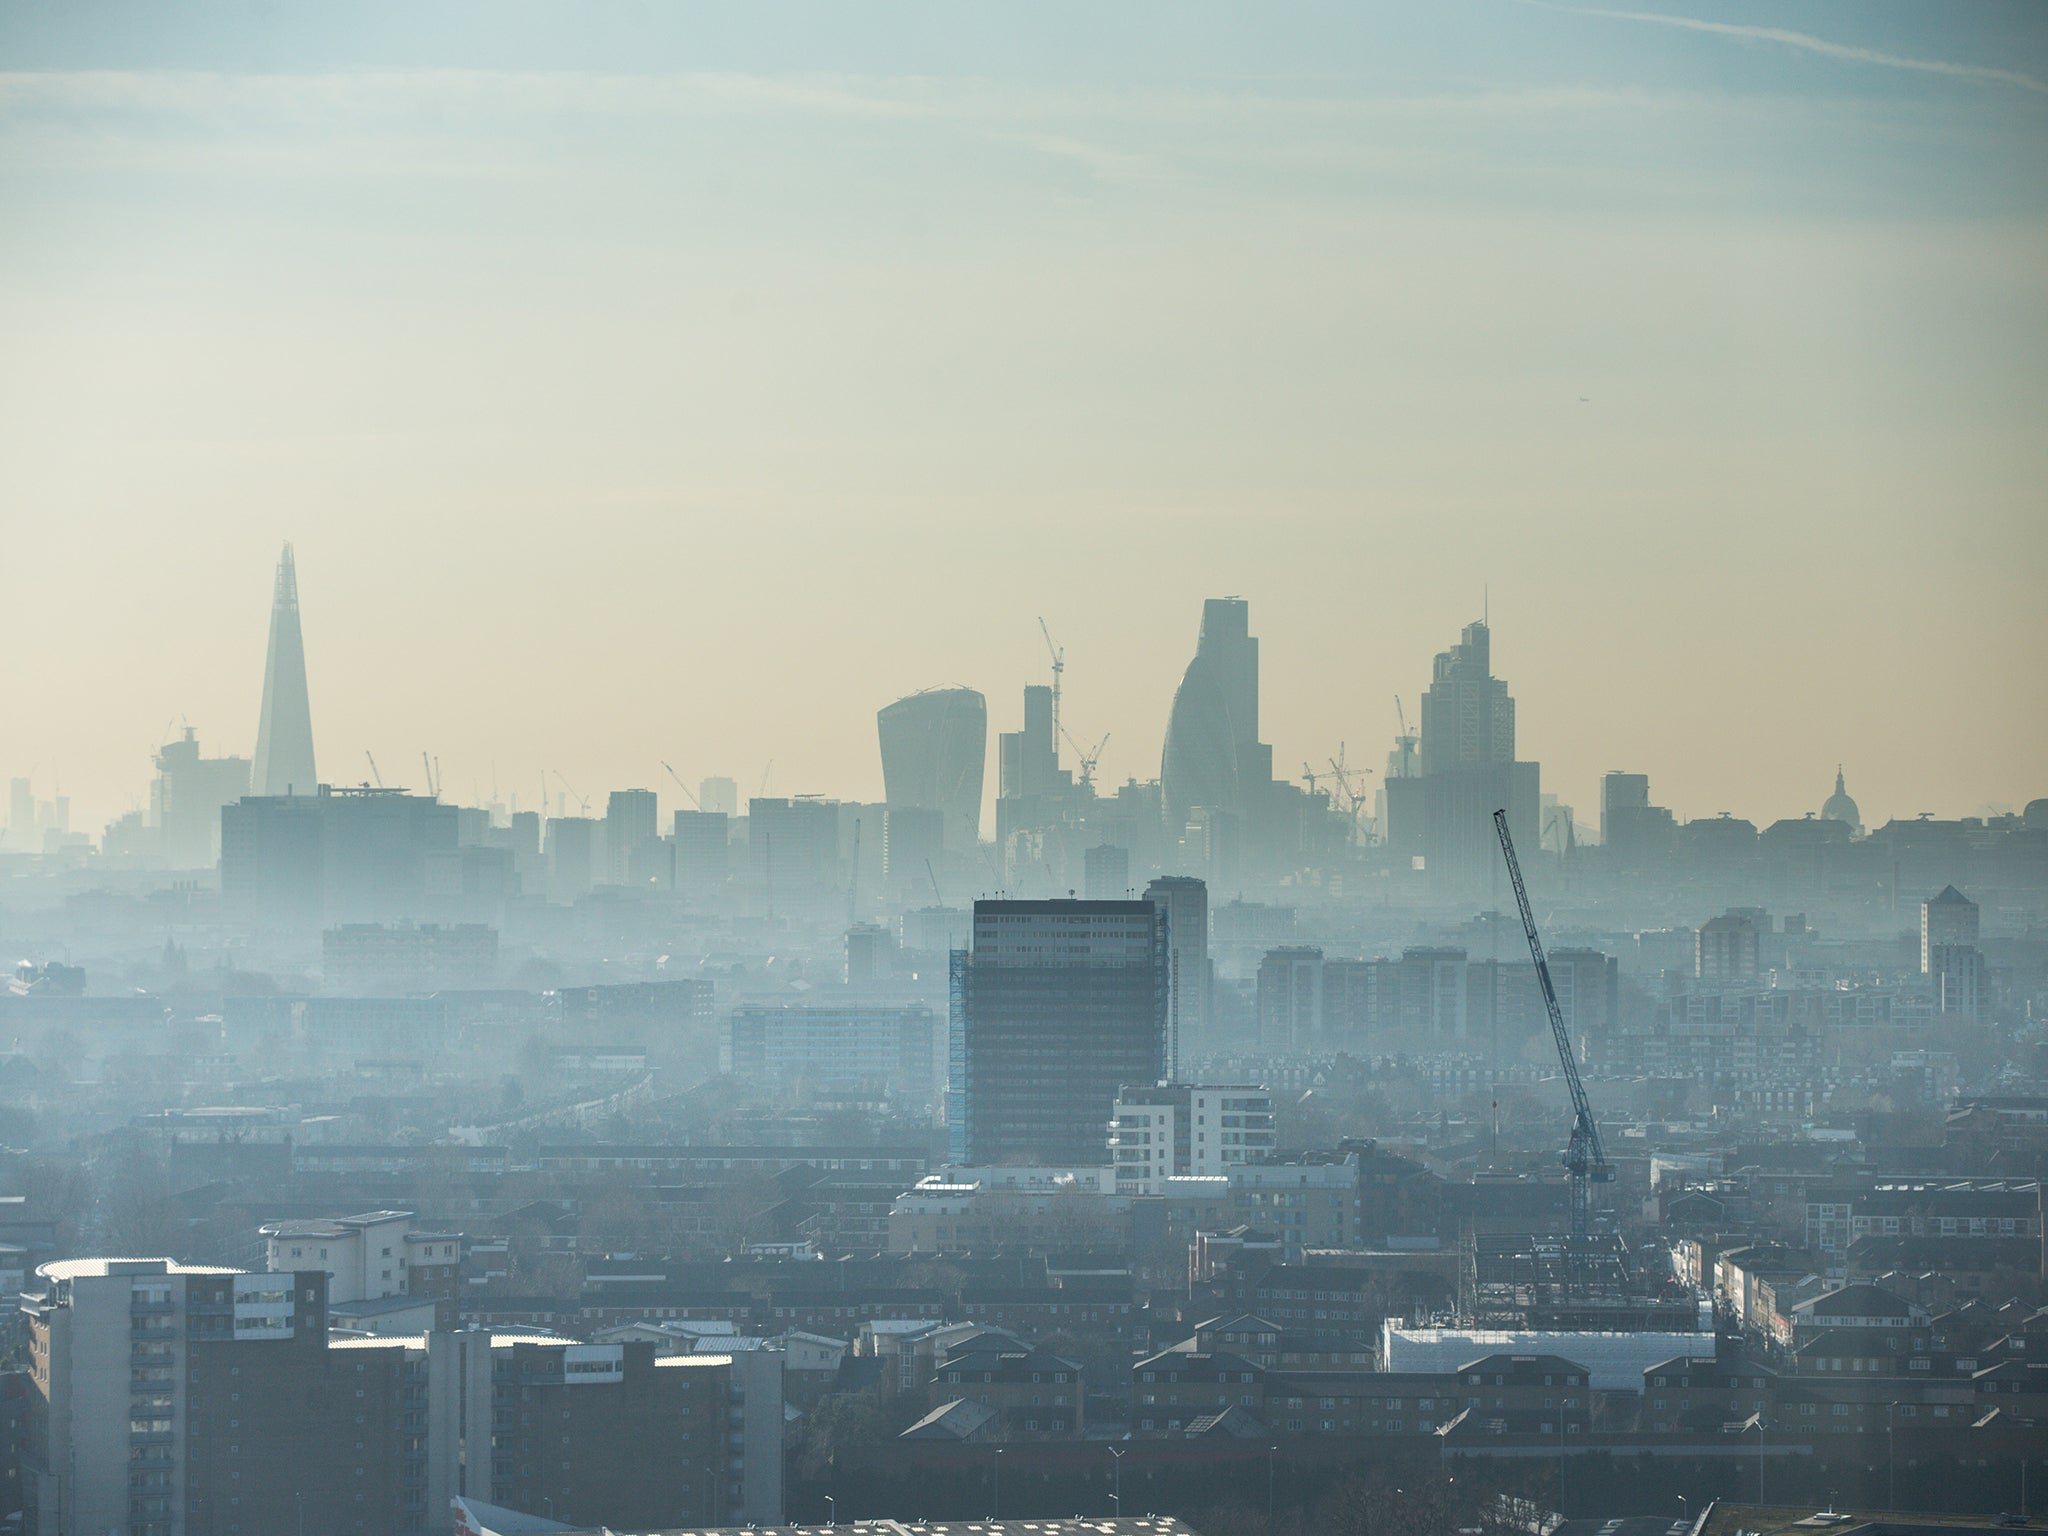 London children are exposed to harmful air pollution from cars that is decreasing their lung capacity by 5 per cent